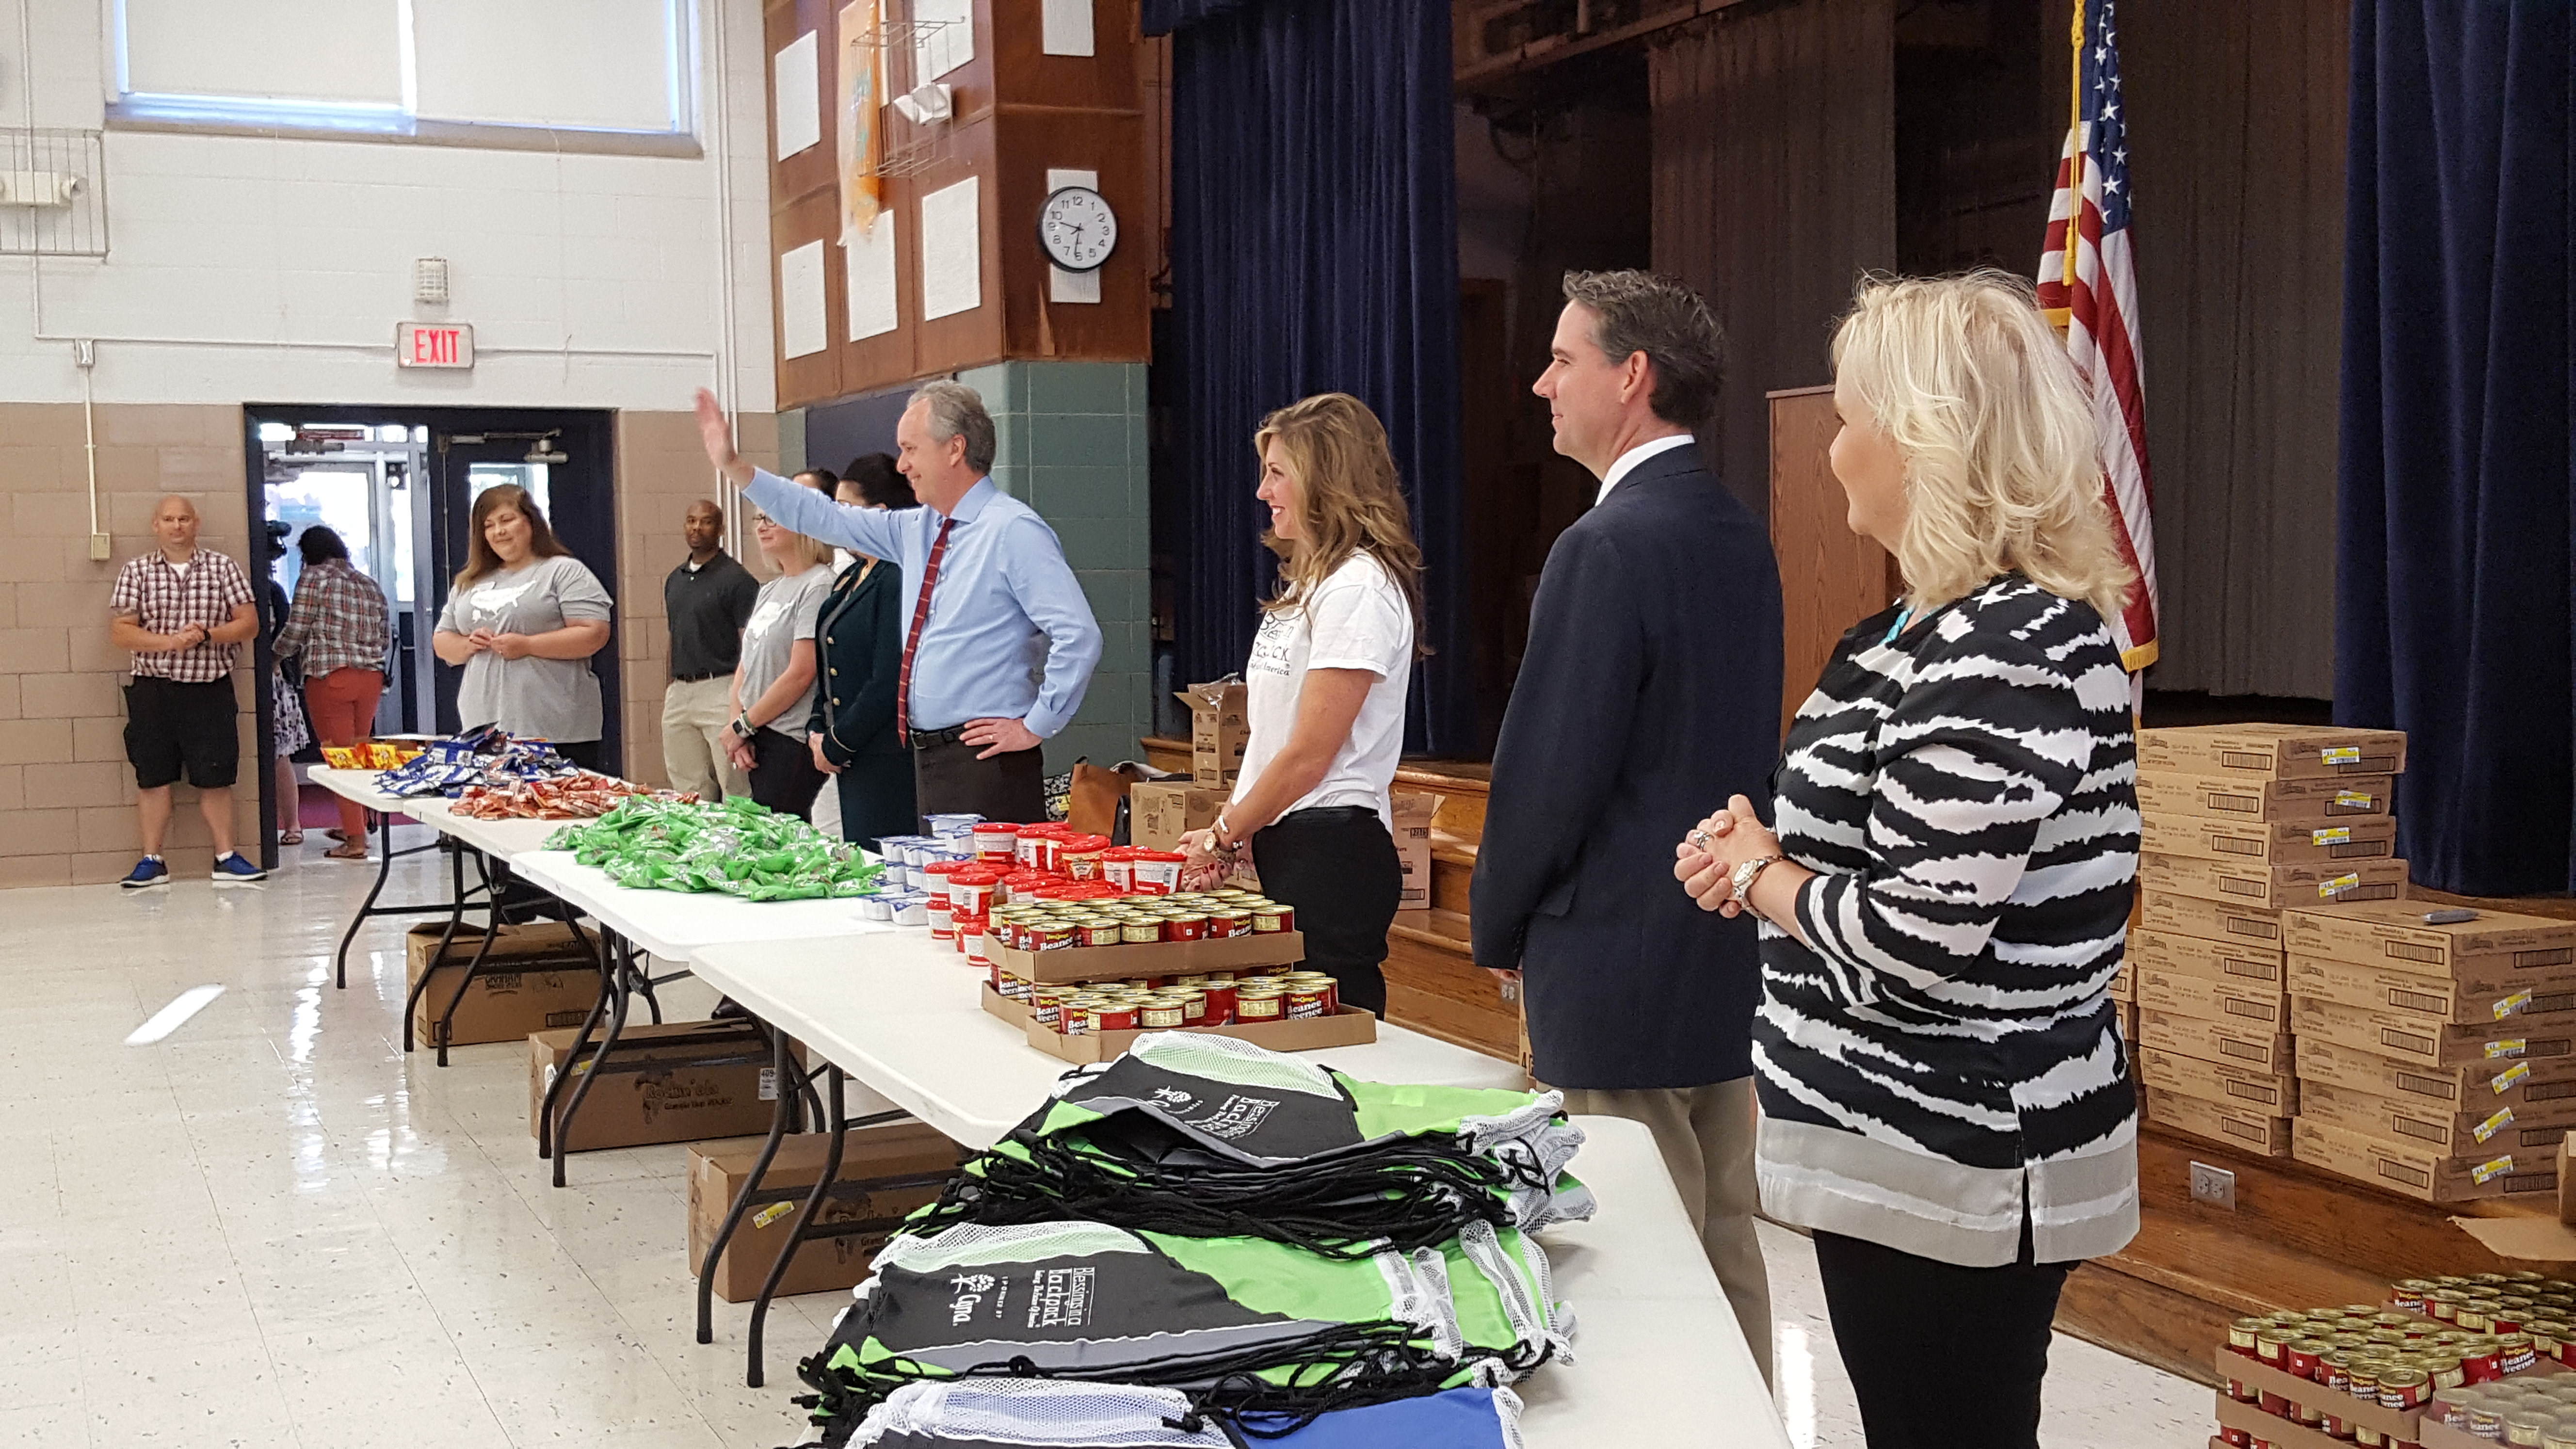 Louisville Mayor Takes Part in Blessings in a Backpack Day